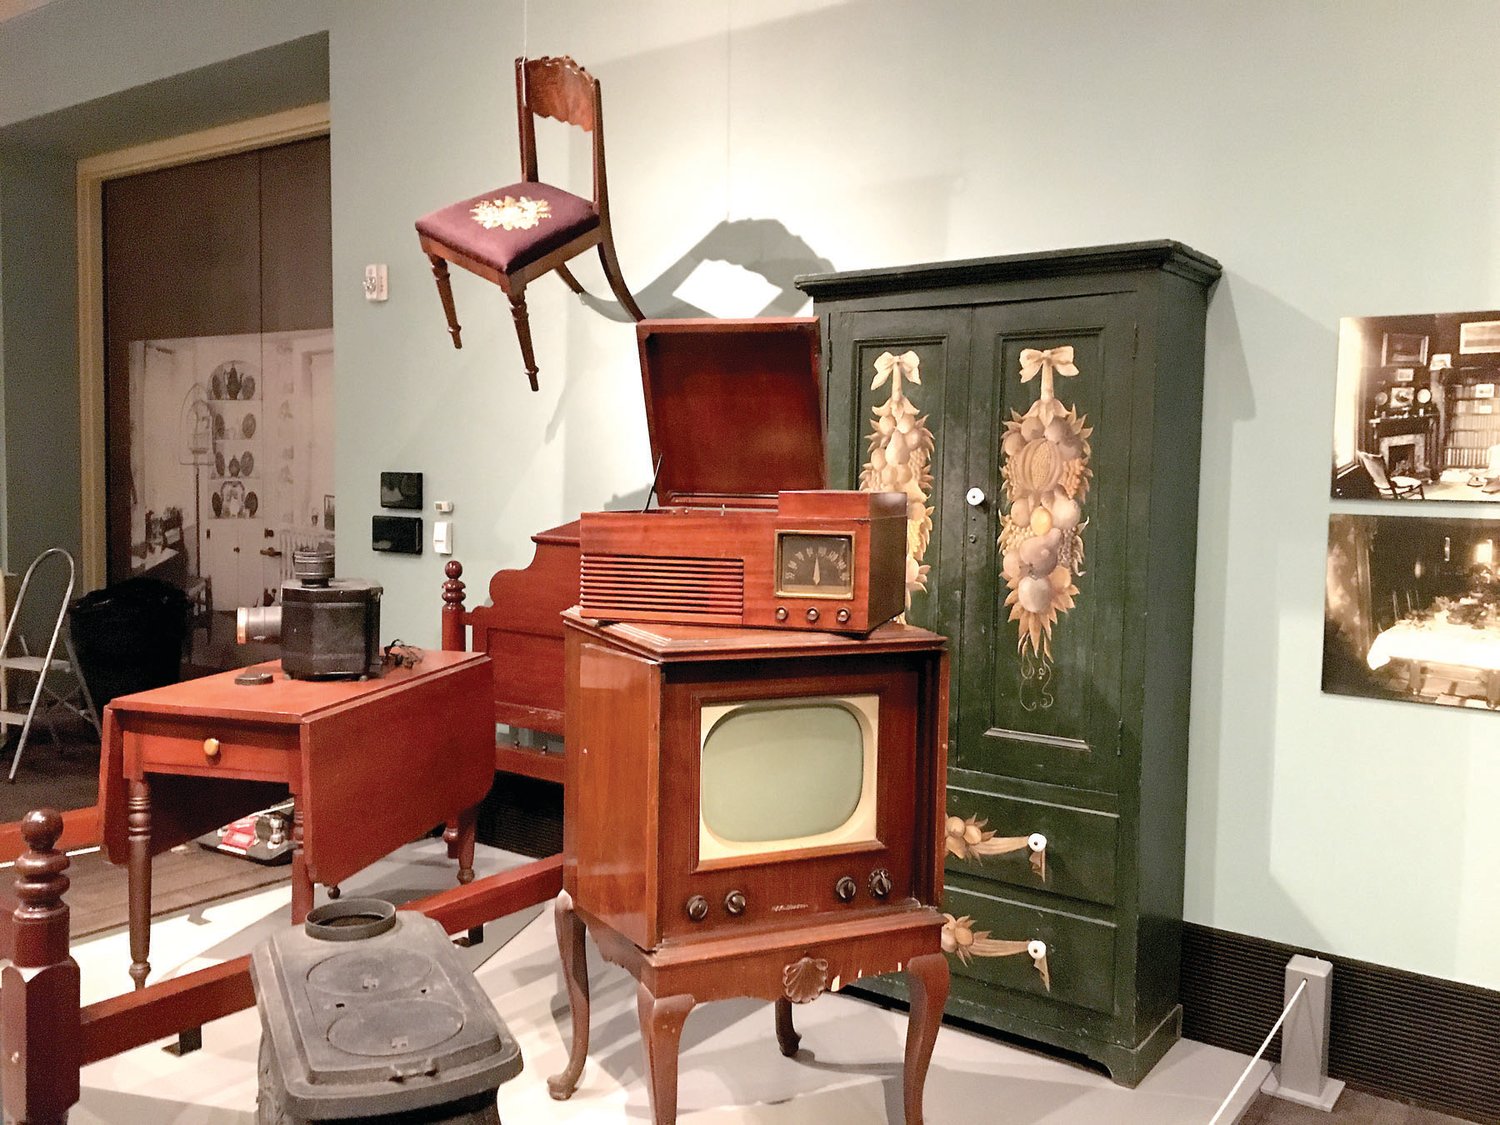 A new exhibit at the Mercer Museum showcases objects from Bucks County’s history, including radios and TVs.